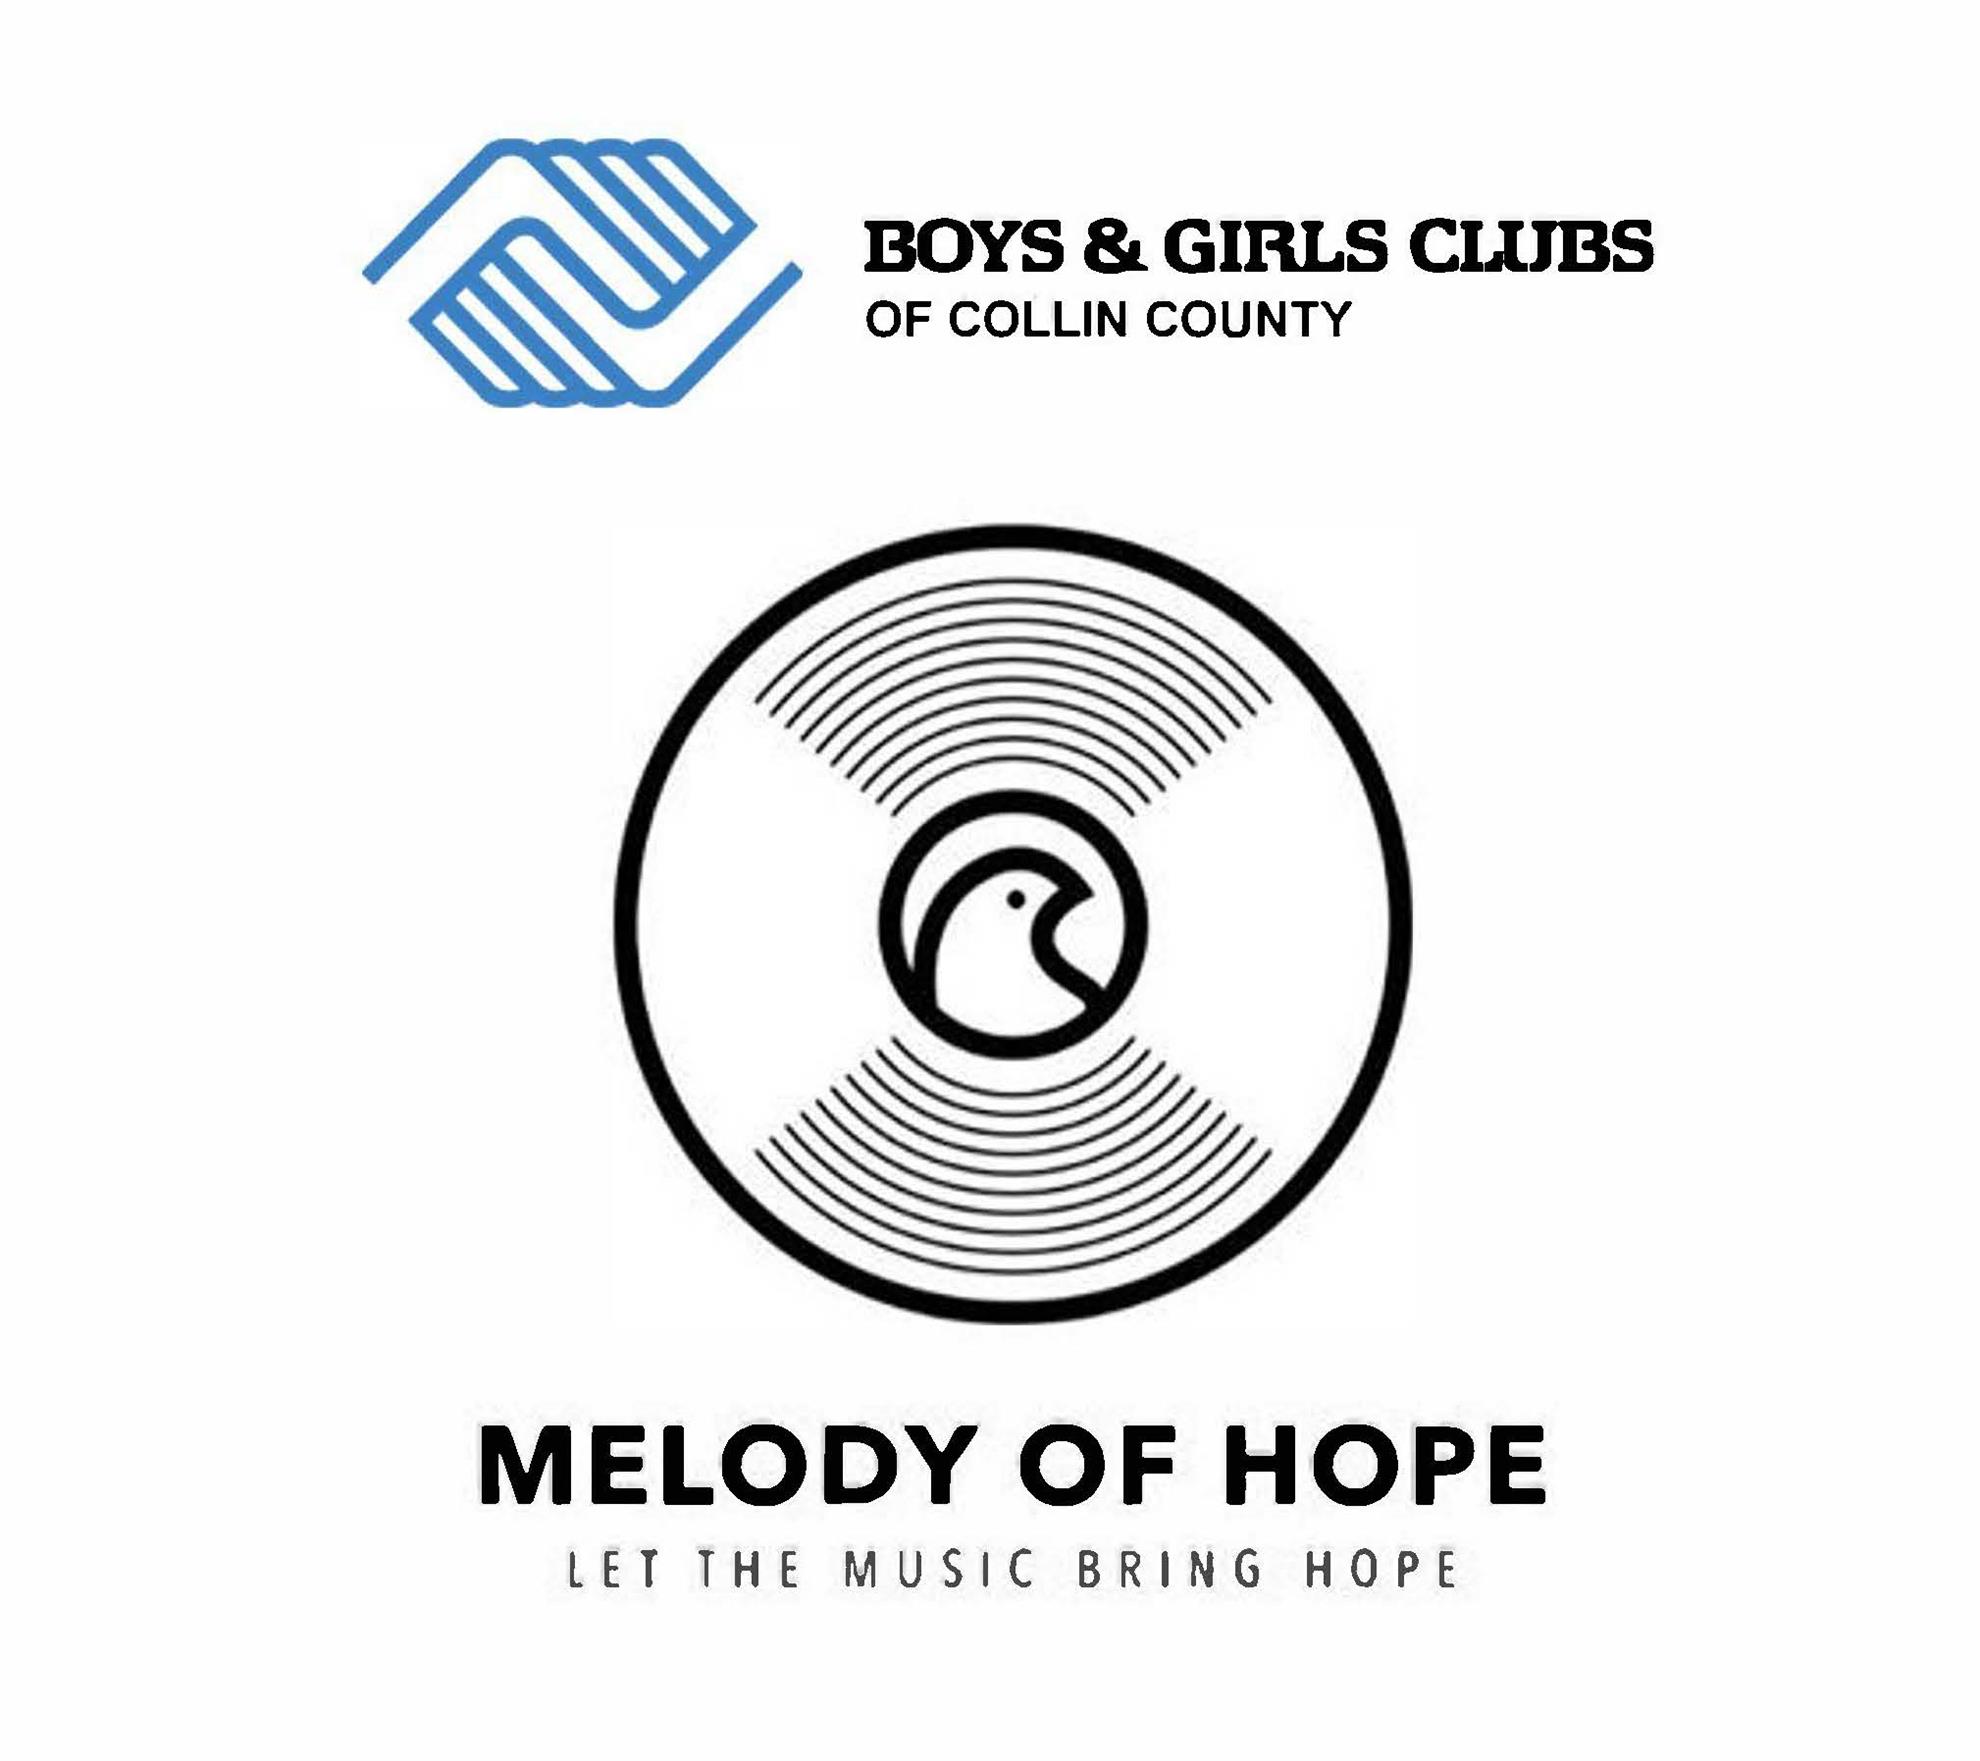 Boys and Girls Club of Collin County & Melody of Hope